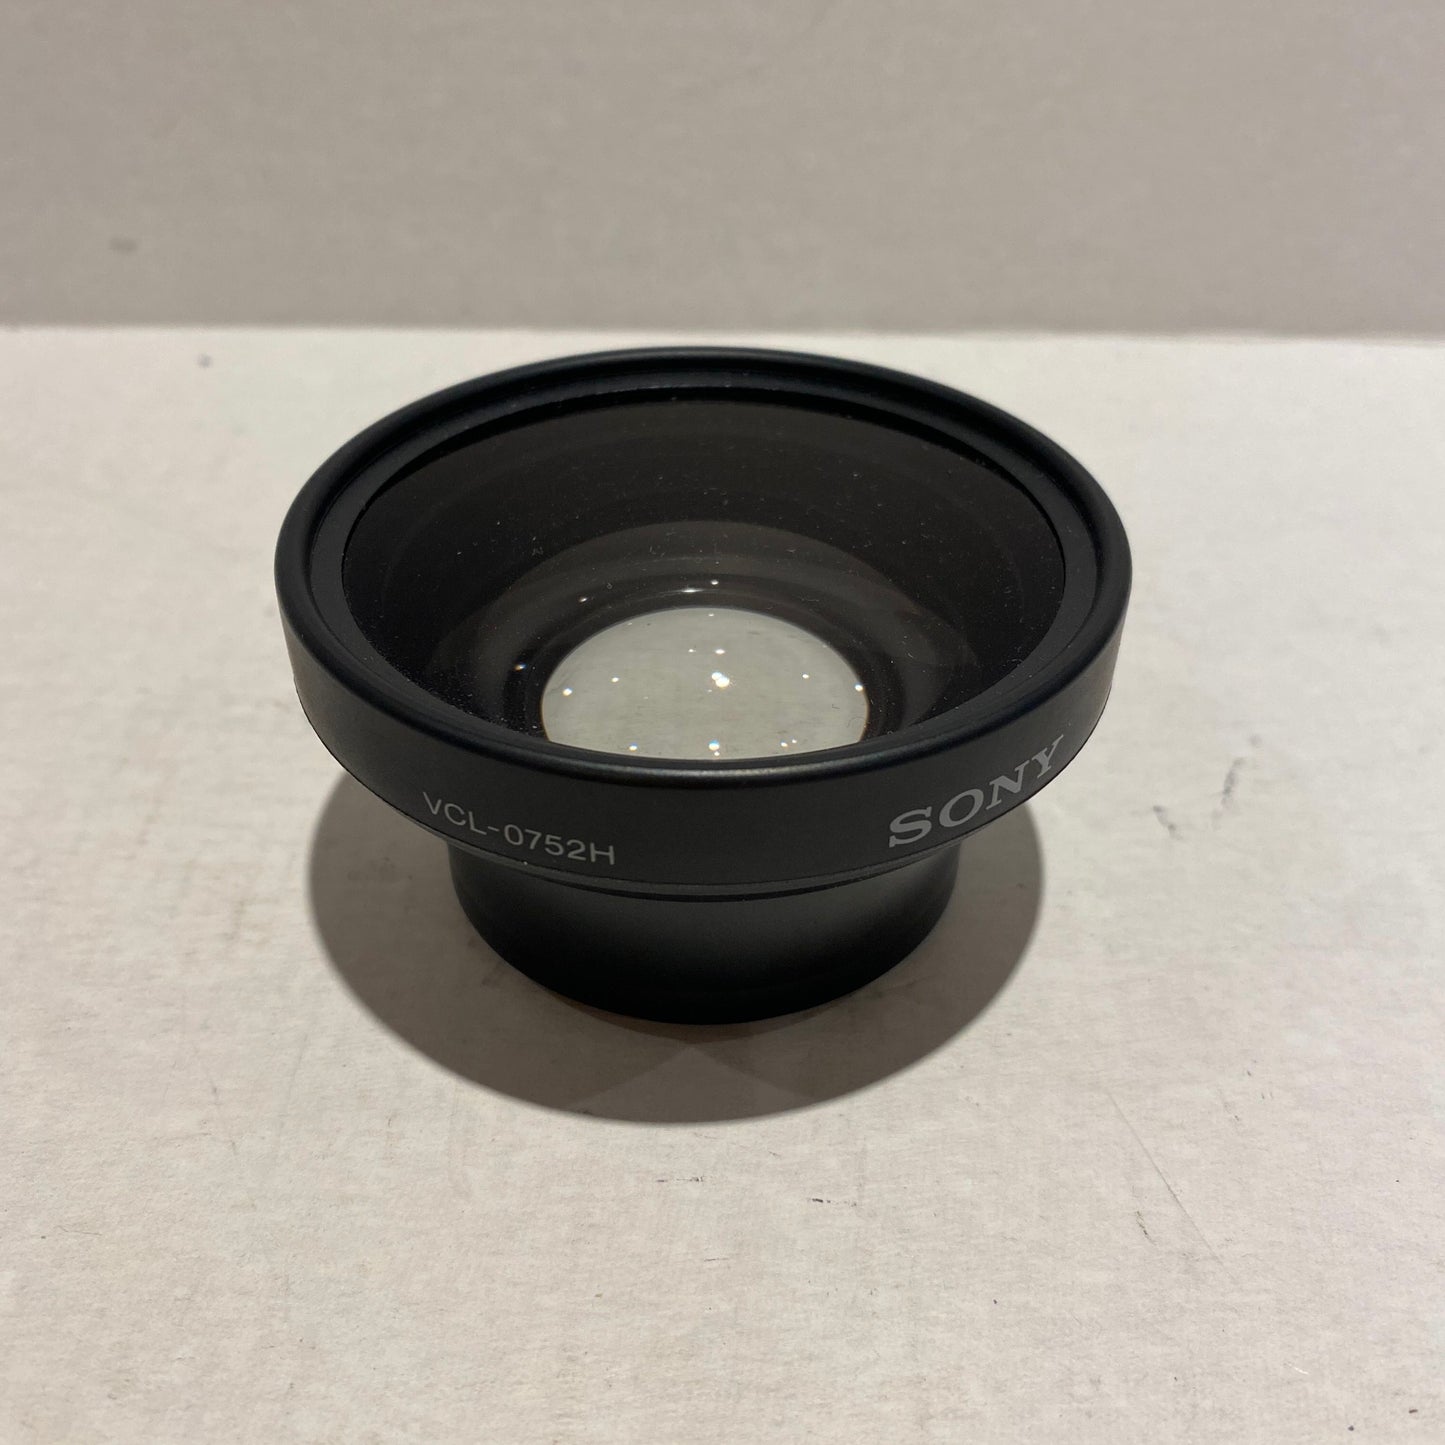 Sony Deluxe Wide Conversion Lens x0.7 for 52mm Diameter Lenses - VCL0752H